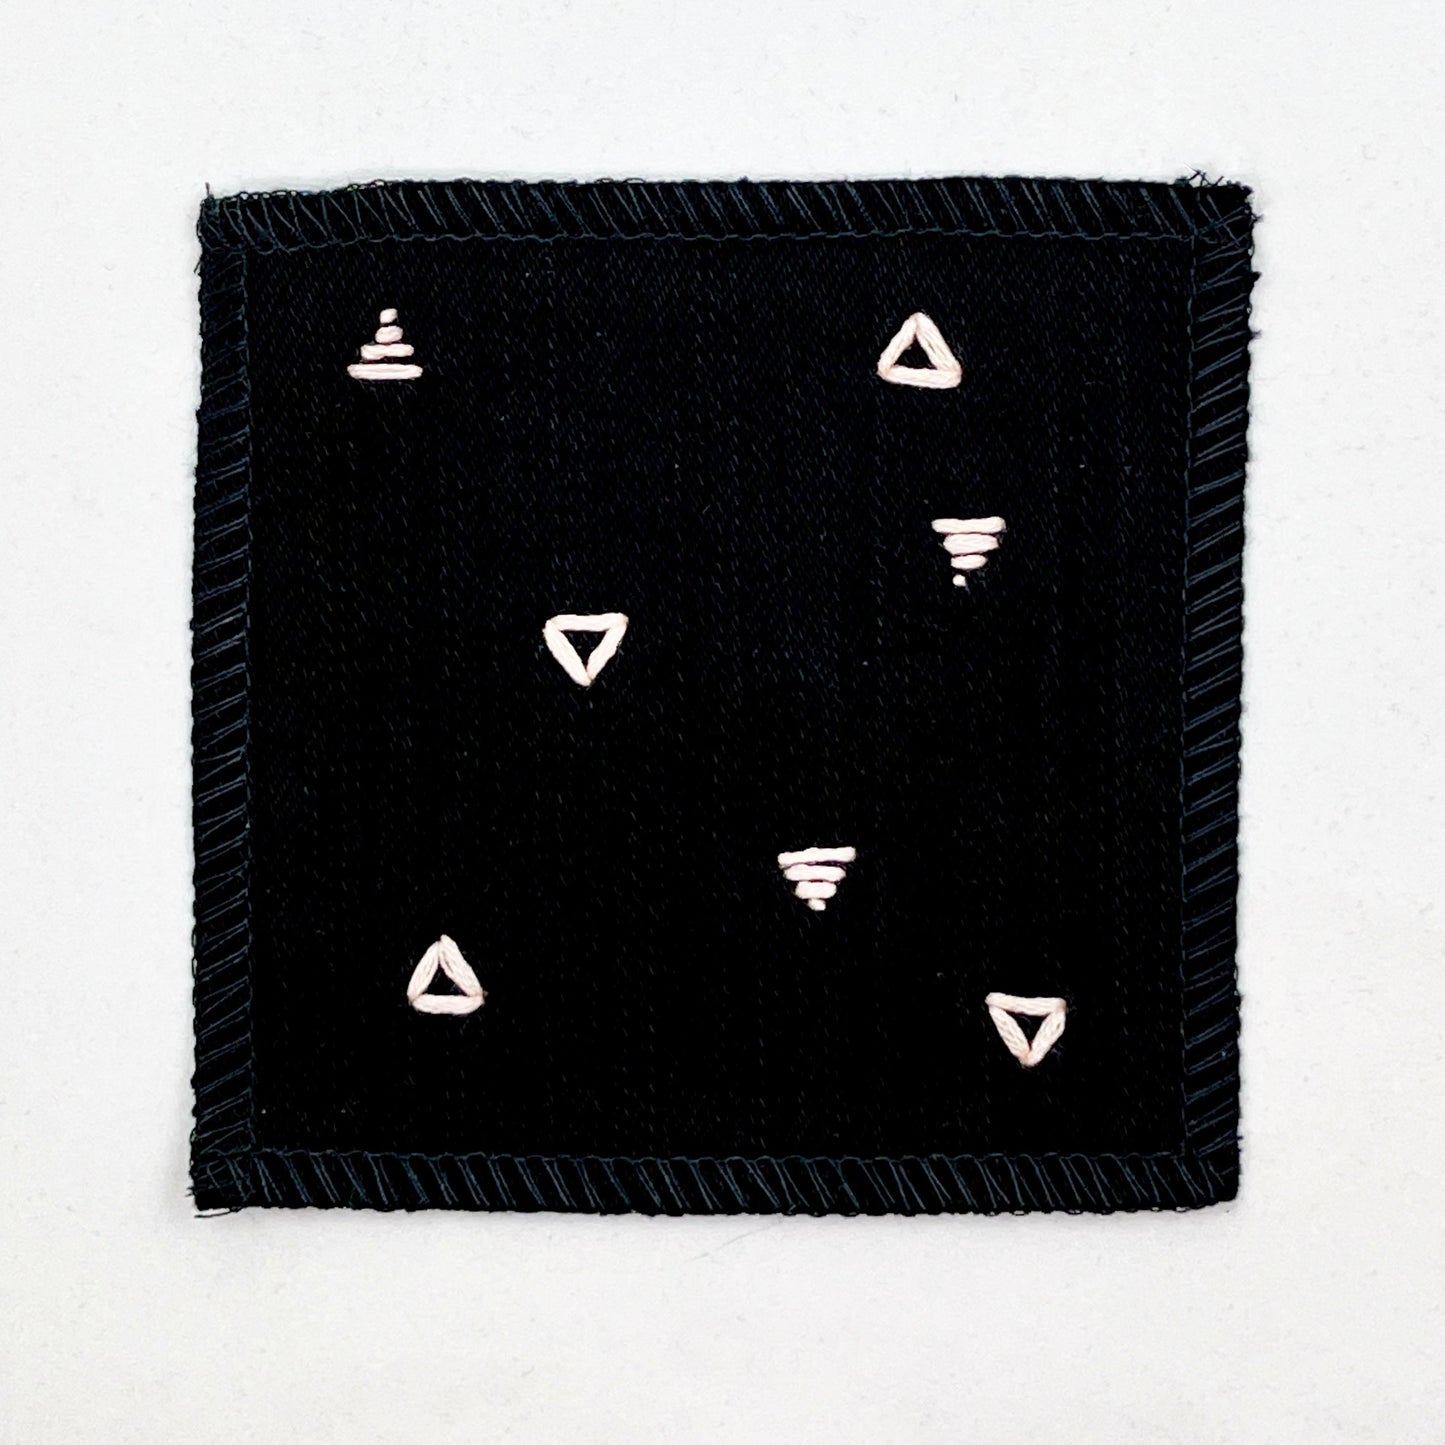 a square patch made out of black canvas, handstitched with scattered peach triangles, some as outlines some with a line fill, with overlocked edges, on a white background